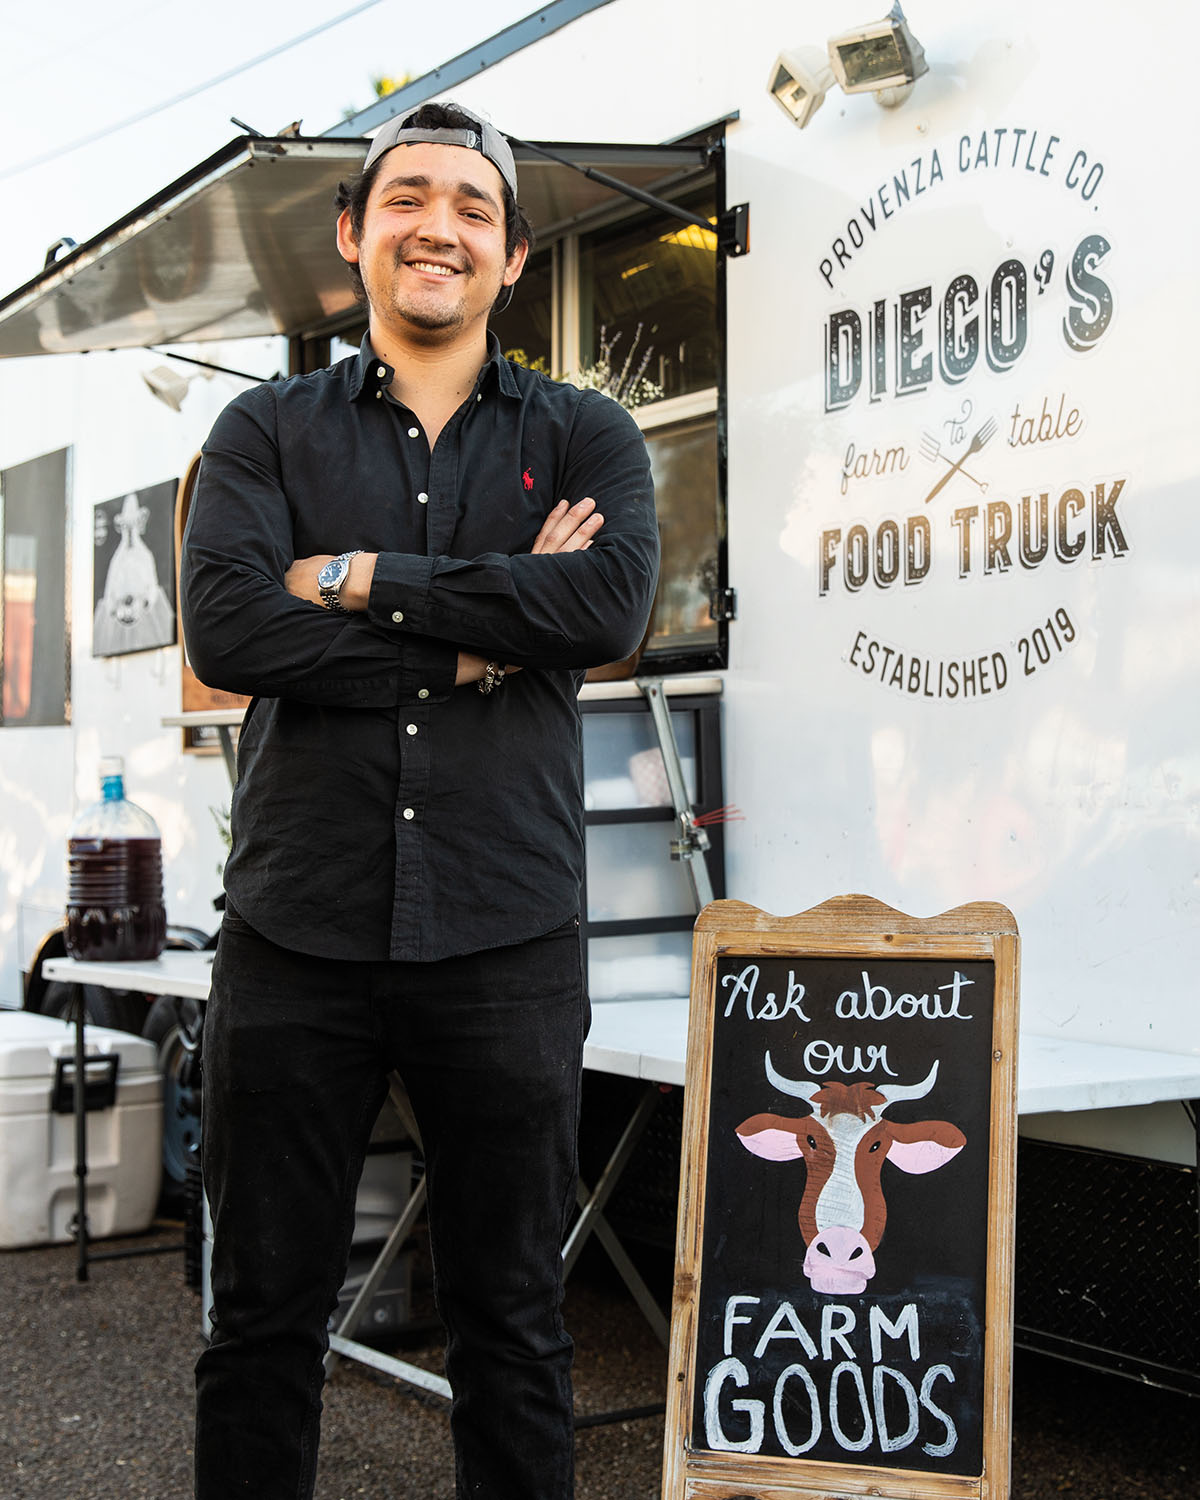 A man in a black button-up shirt stands with his arms crossed in front of a white food truck